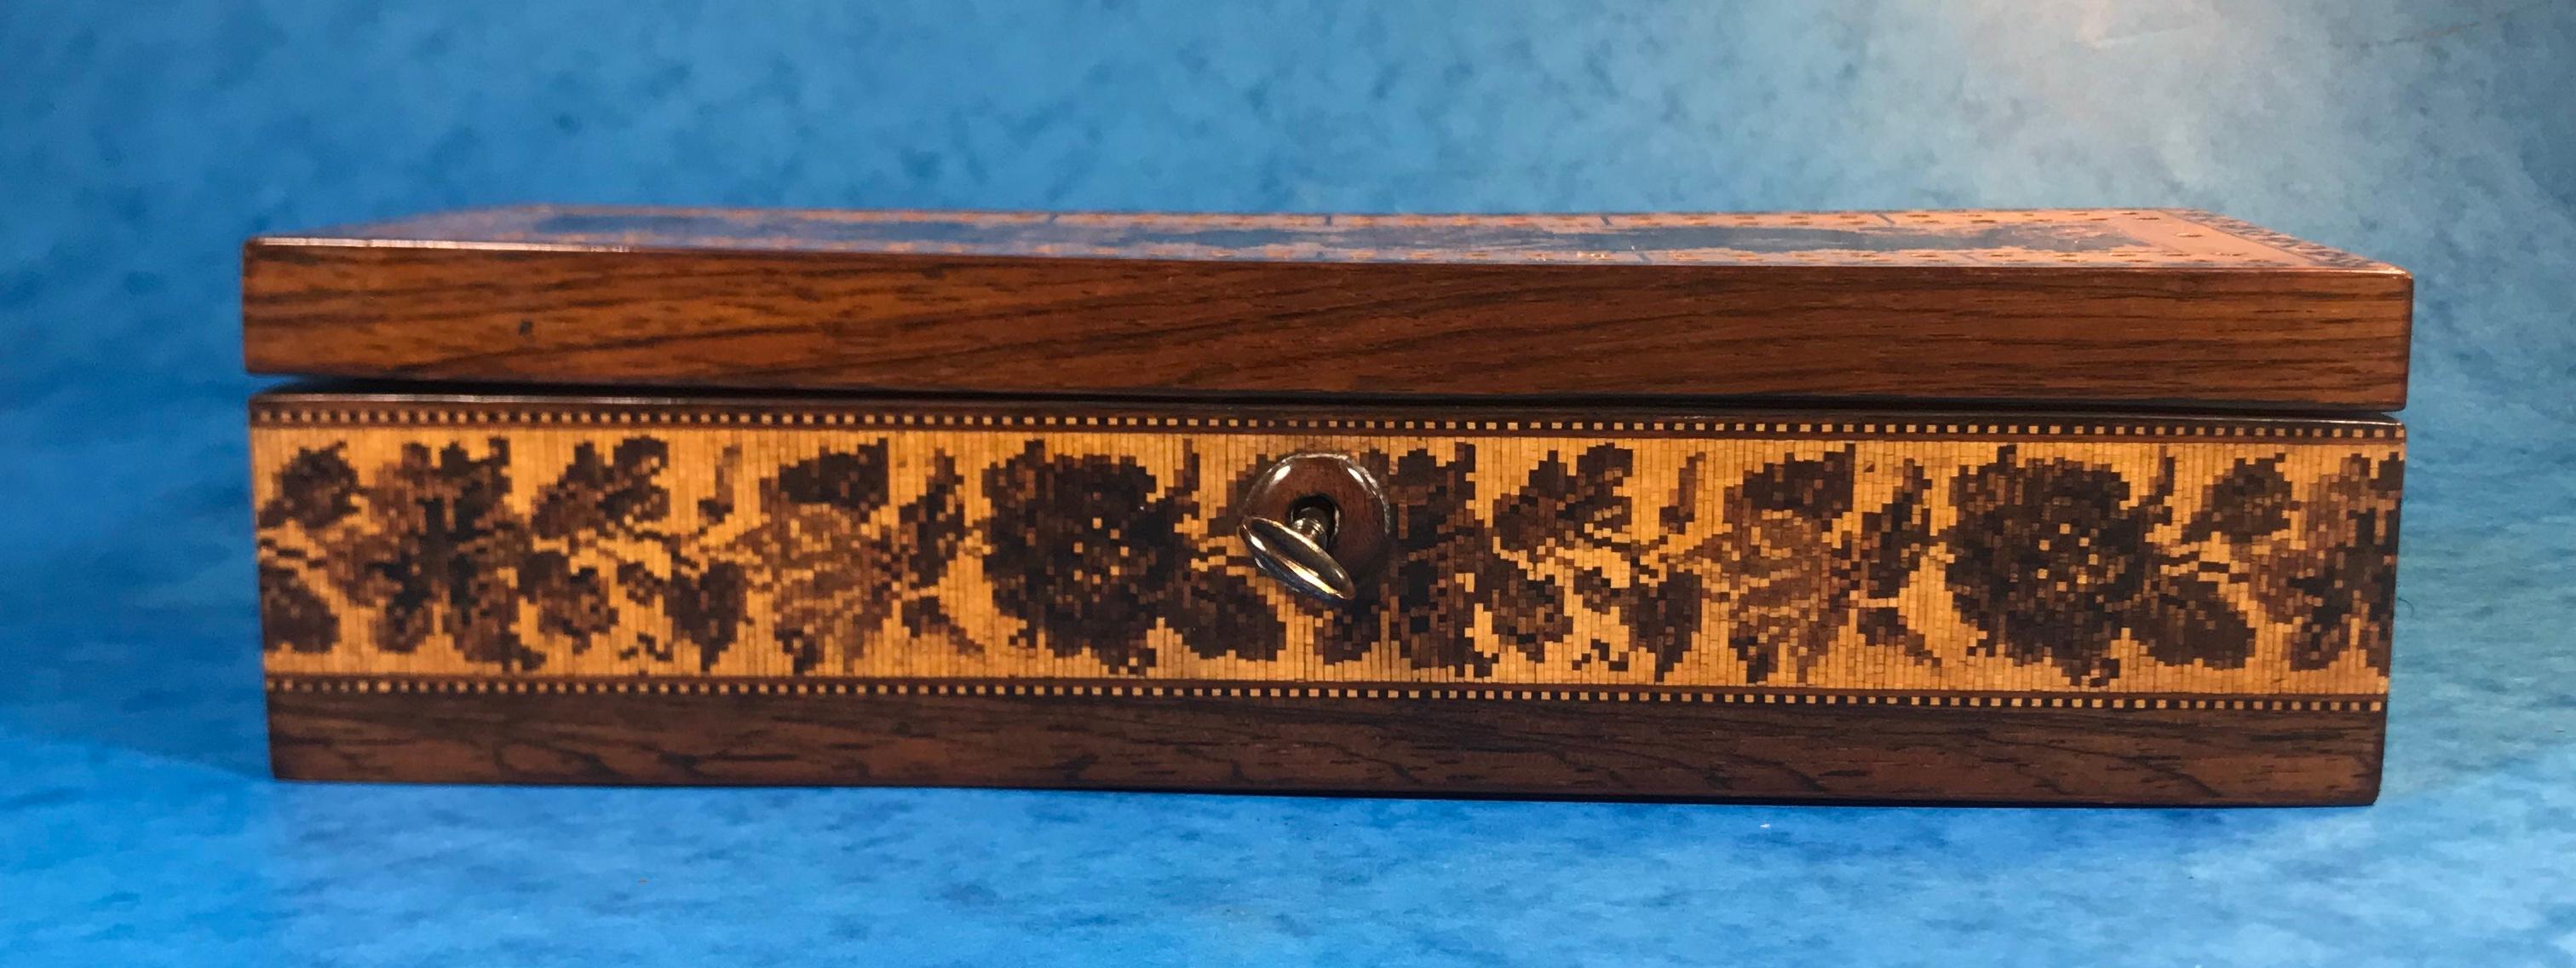 Victorian inlaid Tunbridge ware crib/games box.
Dating back to circa 1850, the crib box is rosewood with a decorative inlaid patten in floral Tunbridge Ware. It has a working lock and key, the interior has been relined with handcrafted marble